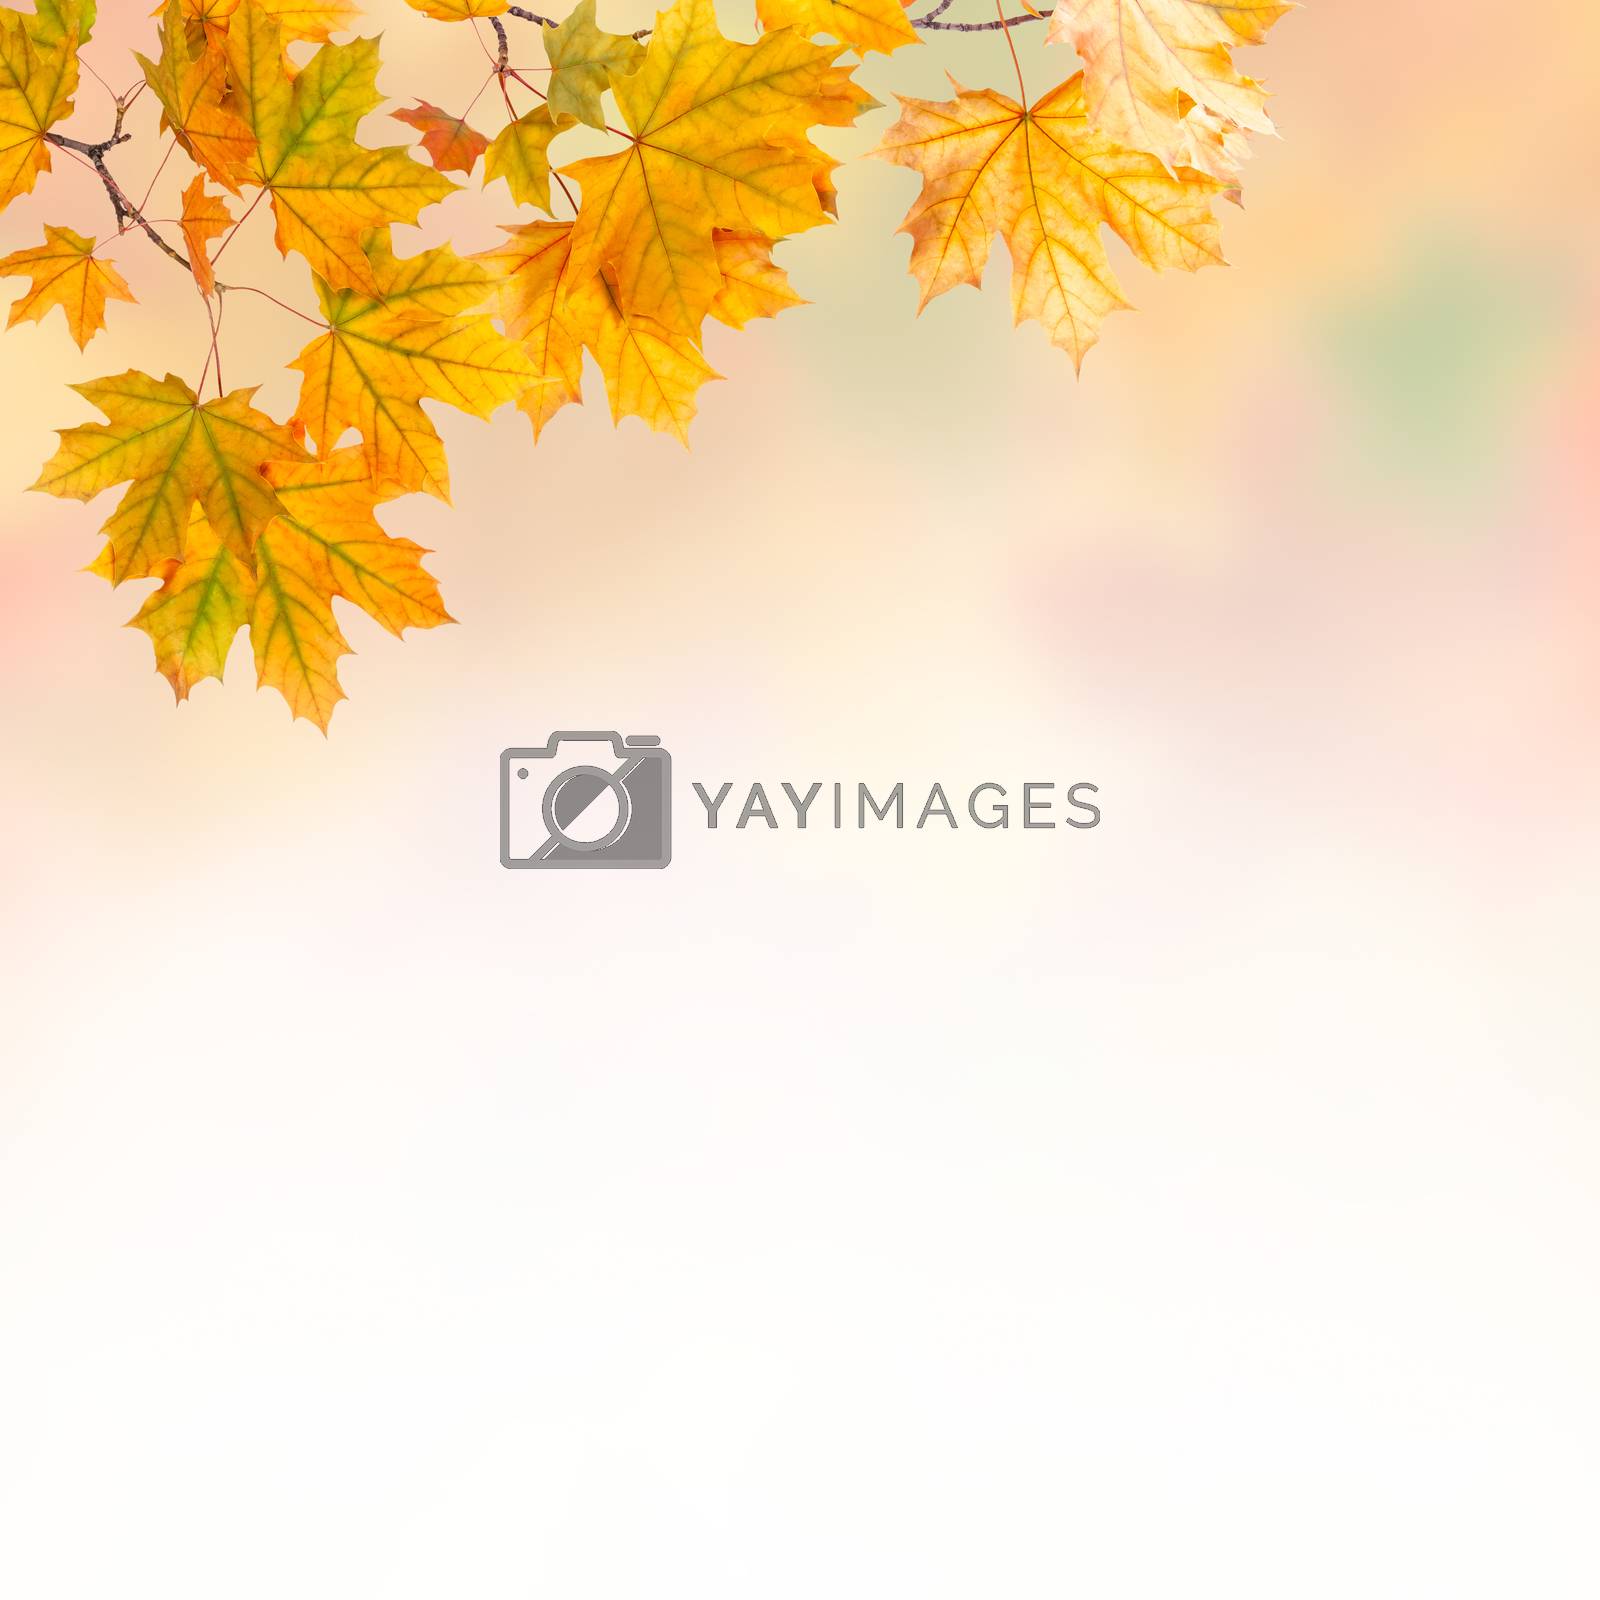 Royalty free image of Autumn background by firewings